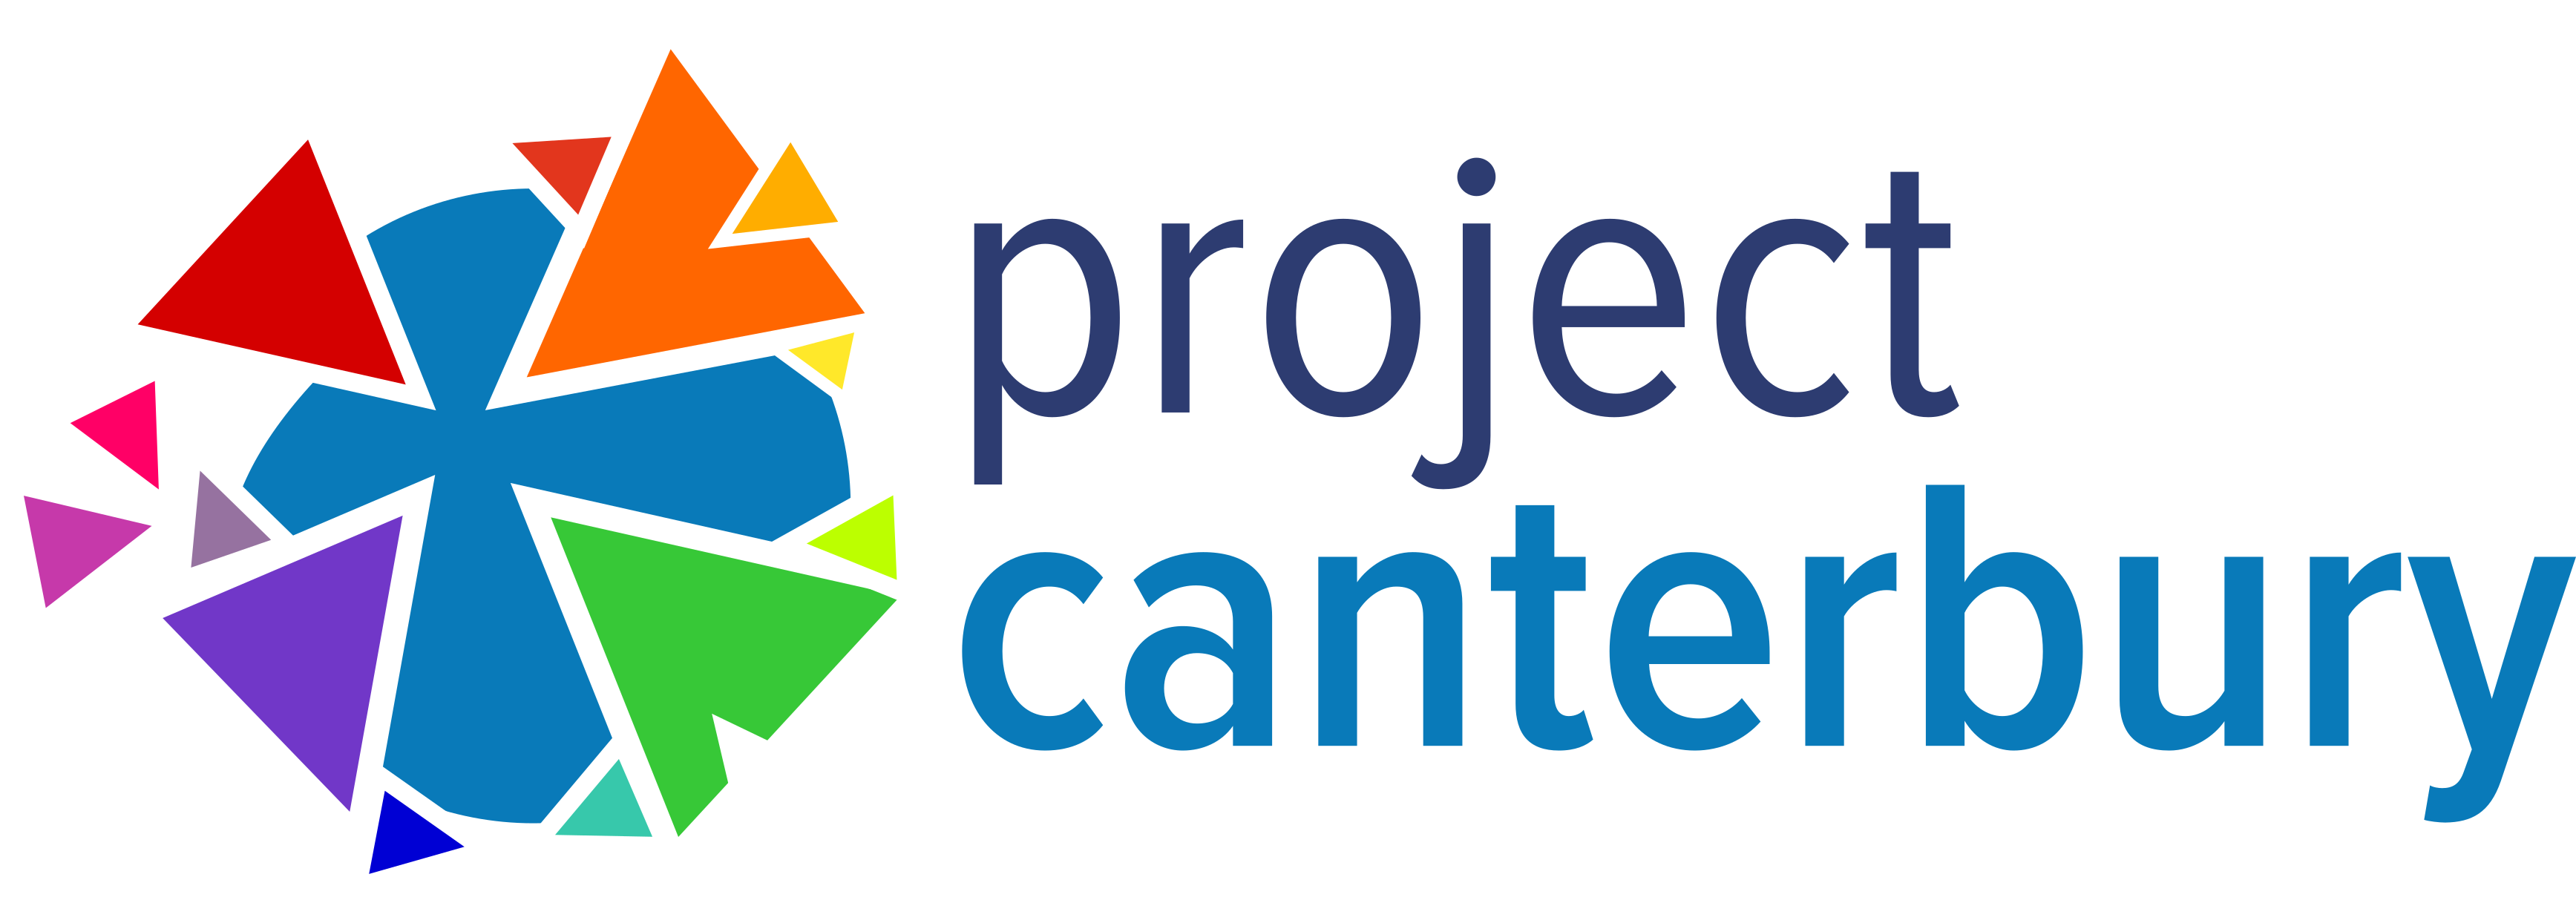 Project Canterbury